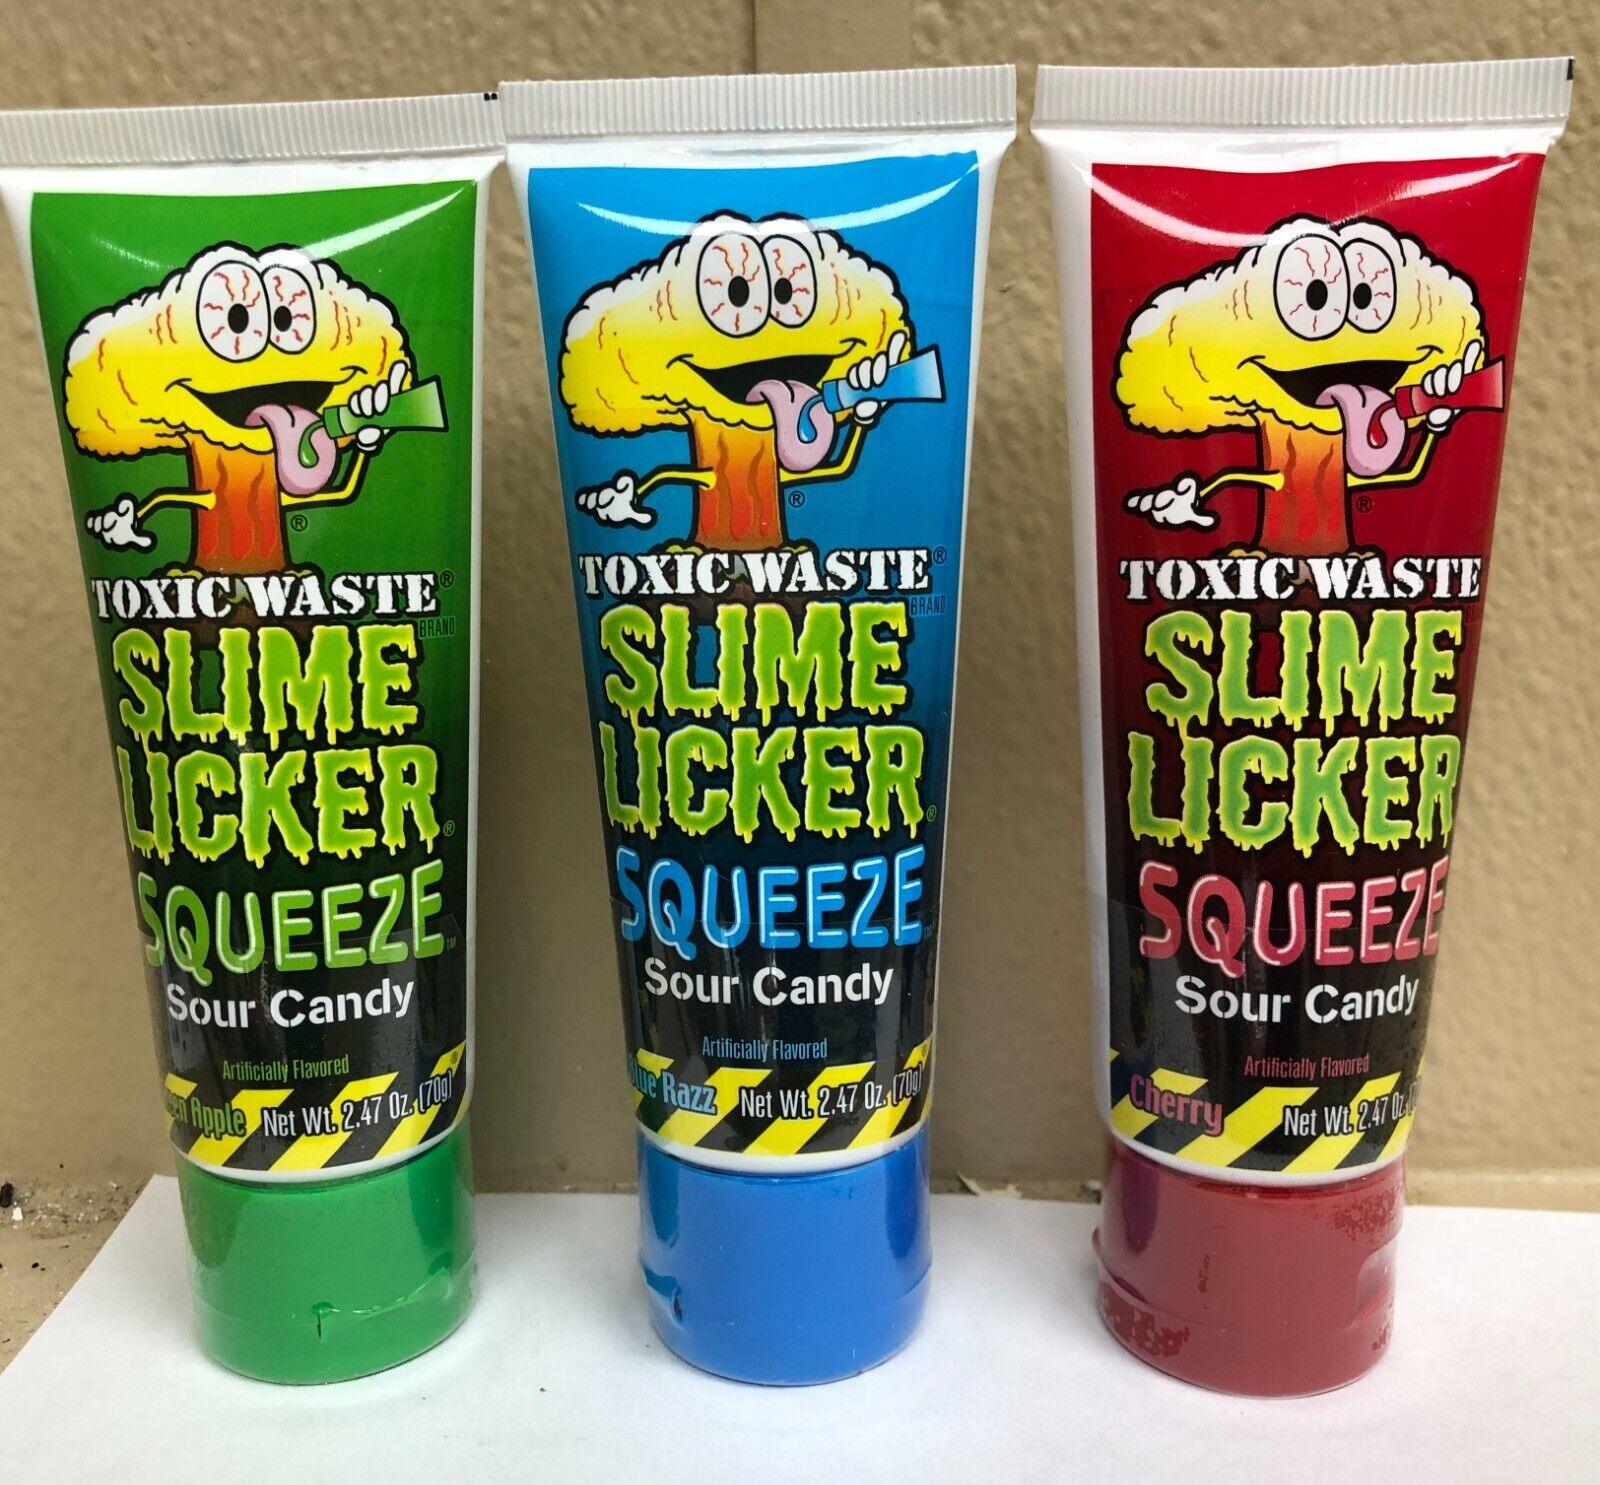 Toxic Waste Slime Licker Squeeze Sour Candy - Extreme Snacks